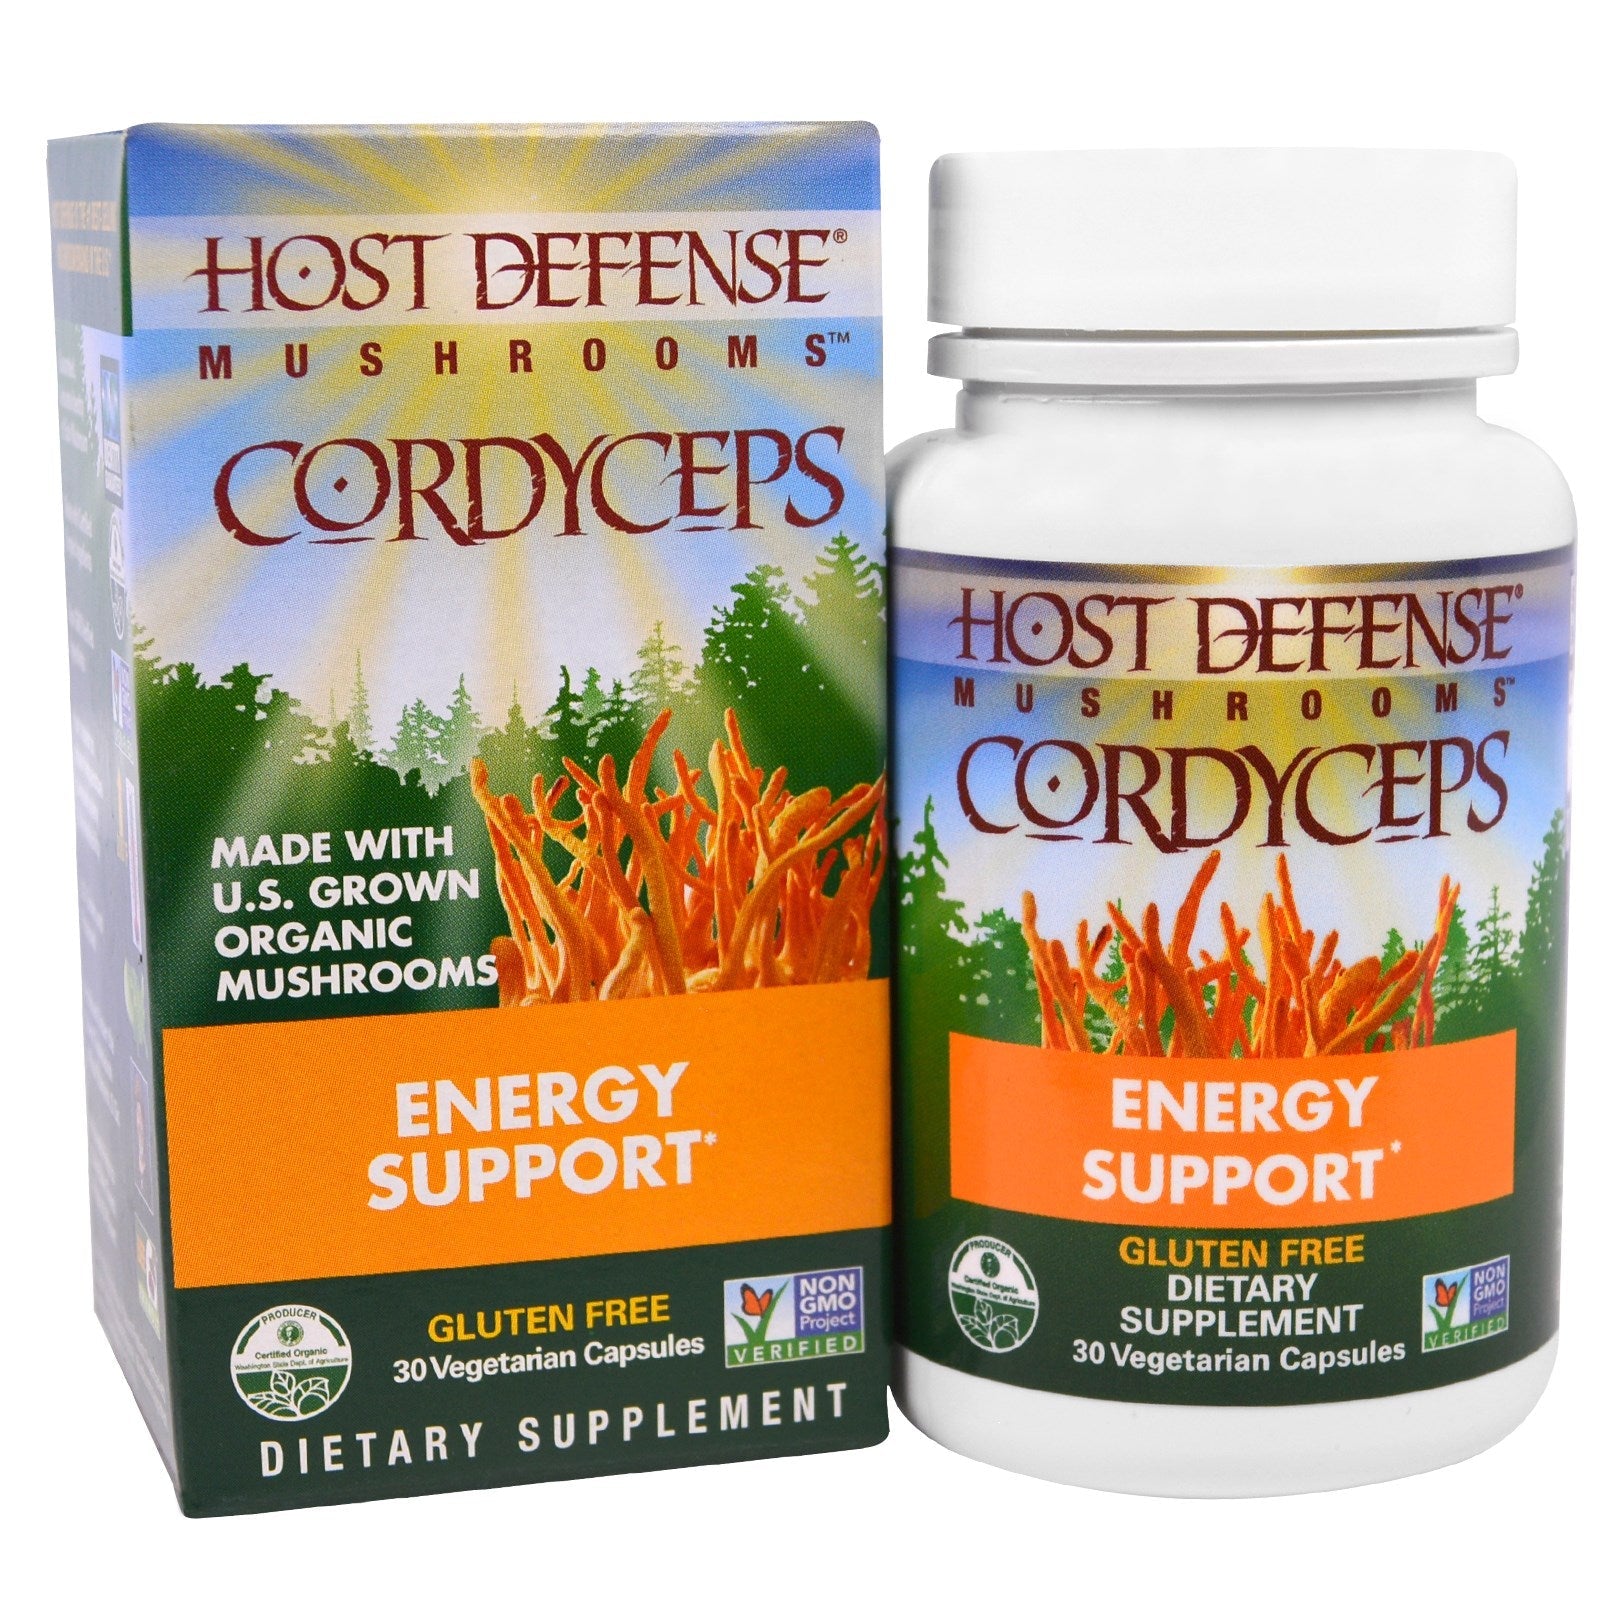 Host Defense Cordyceps Capsules, Energy And Stamina Support, Daily Dietary Supplement, USDA Organic, 30 Vegetarian Capsules (15 Servings)